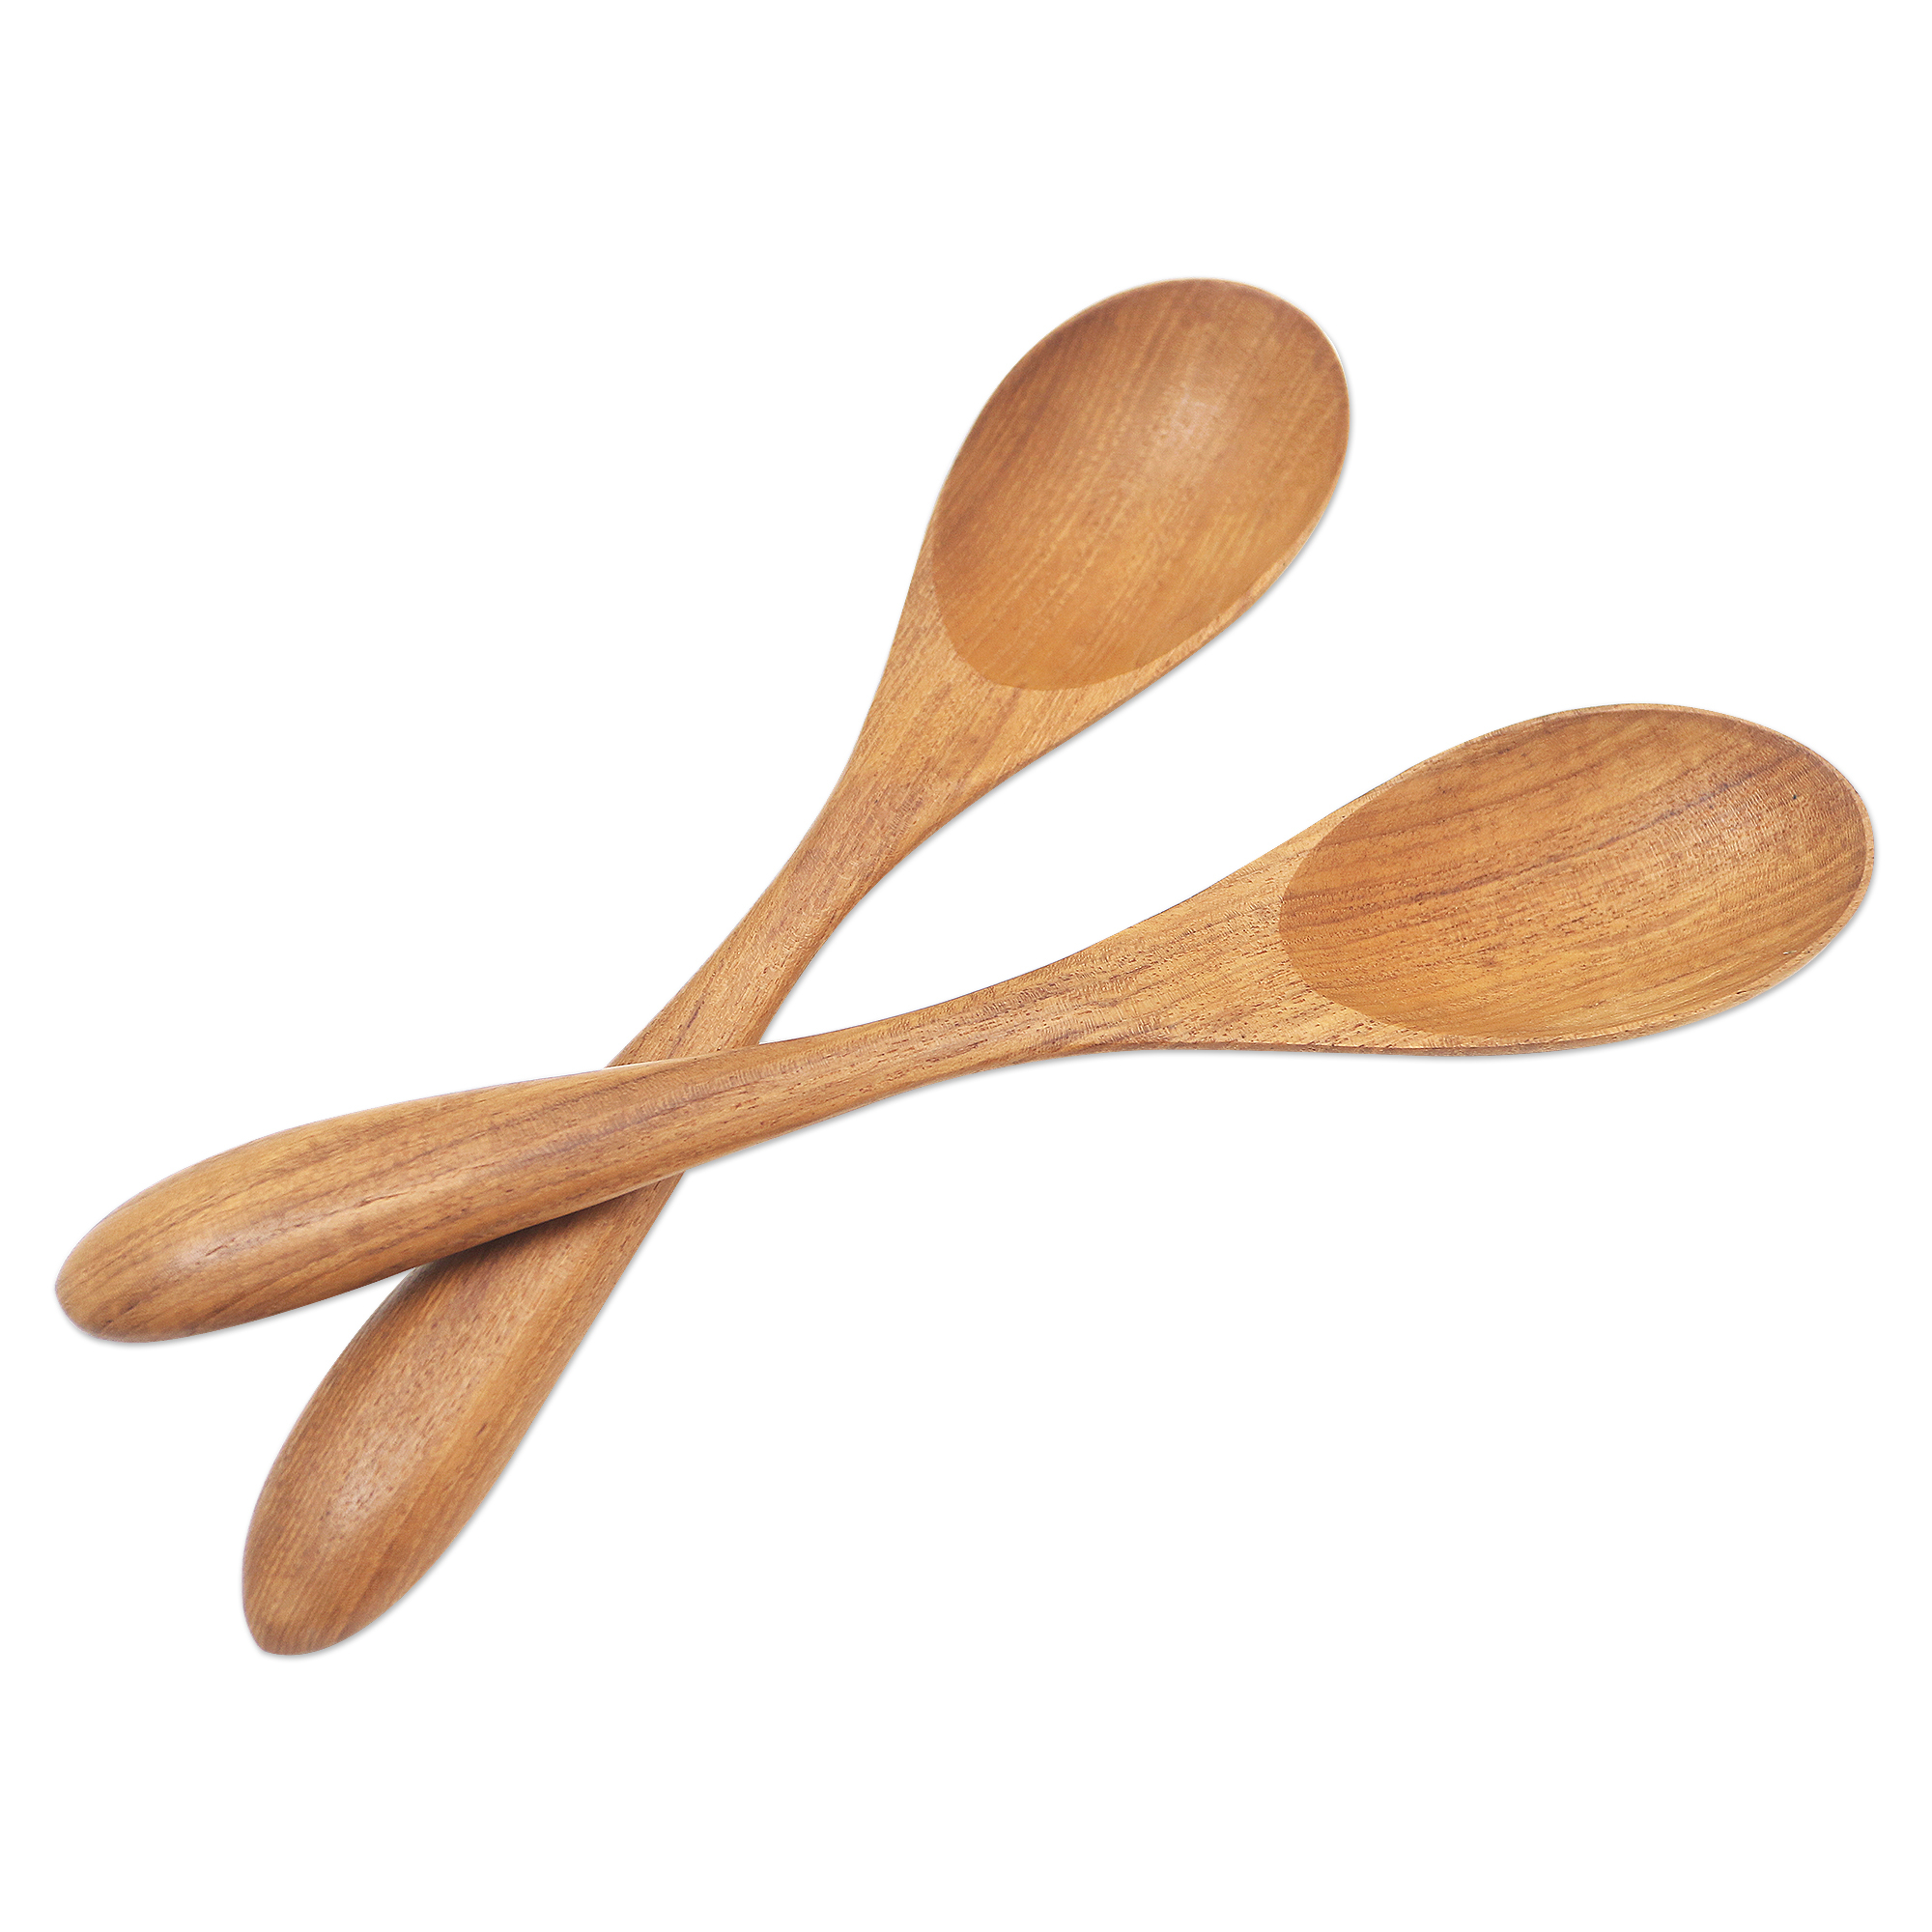 Hand Made Teak Wood Salad Spoons from Bali (Pair) - Hearty Meal | NOVICA